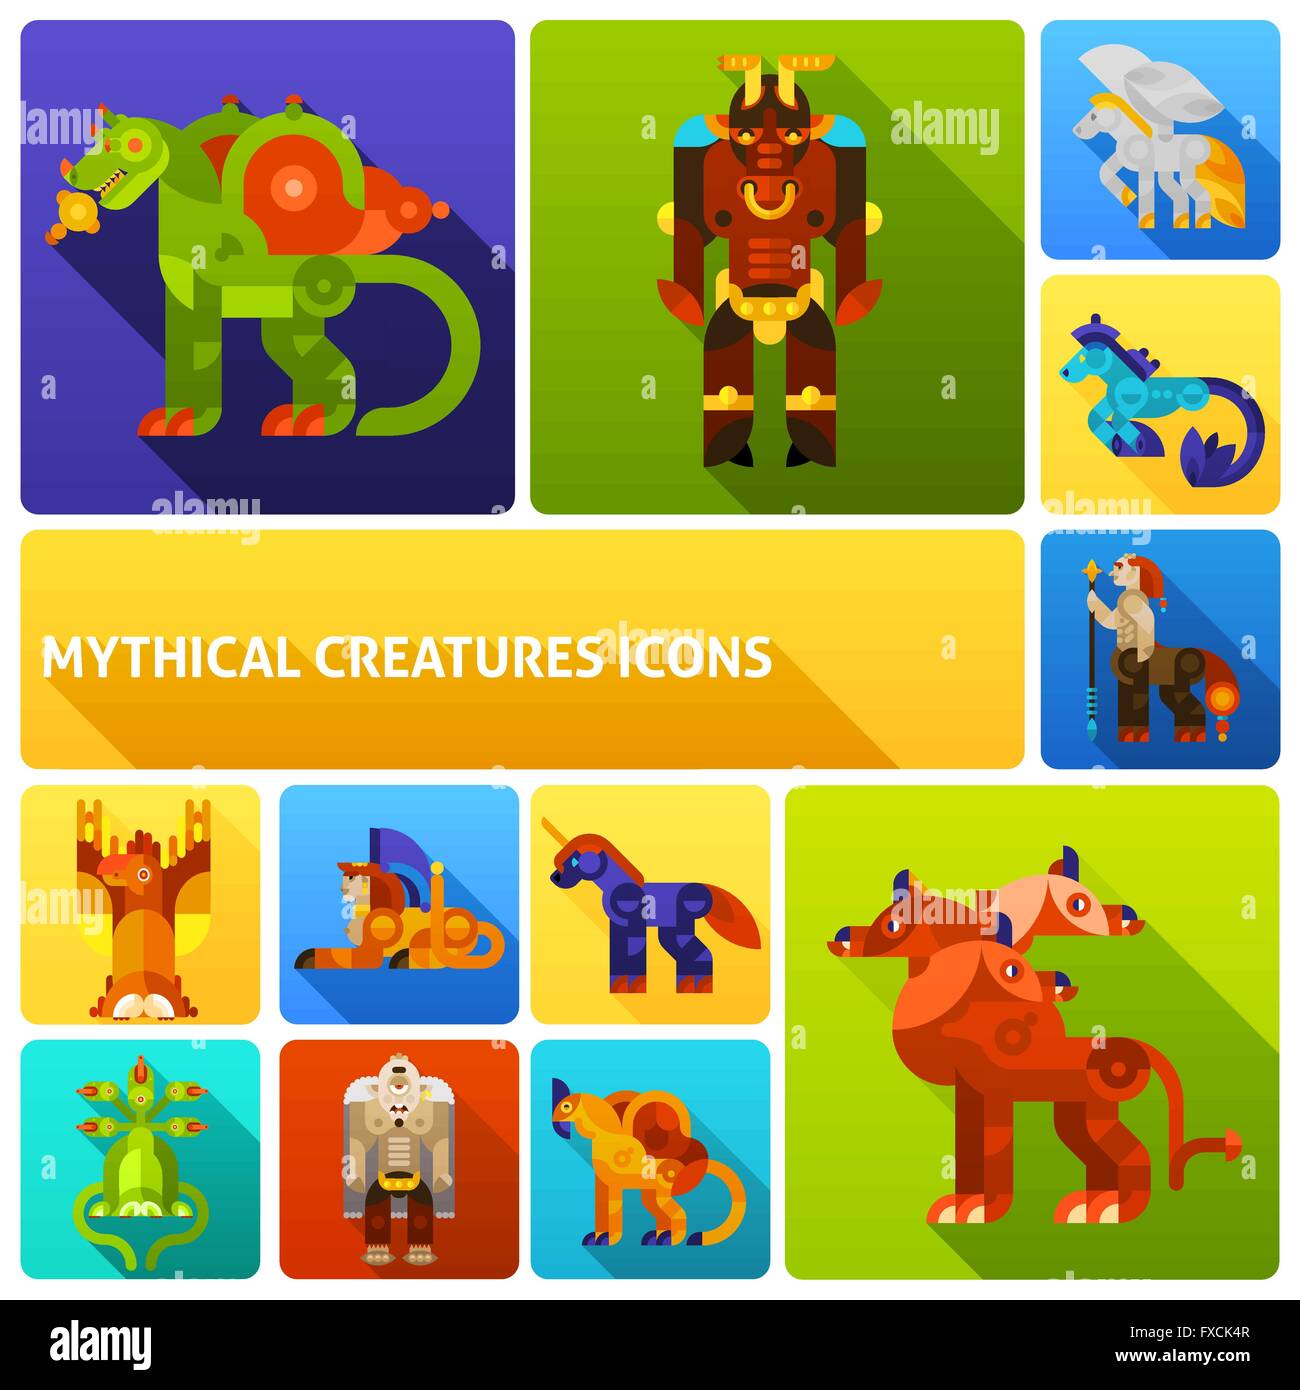 Mythical creatures icons set Stock Vector